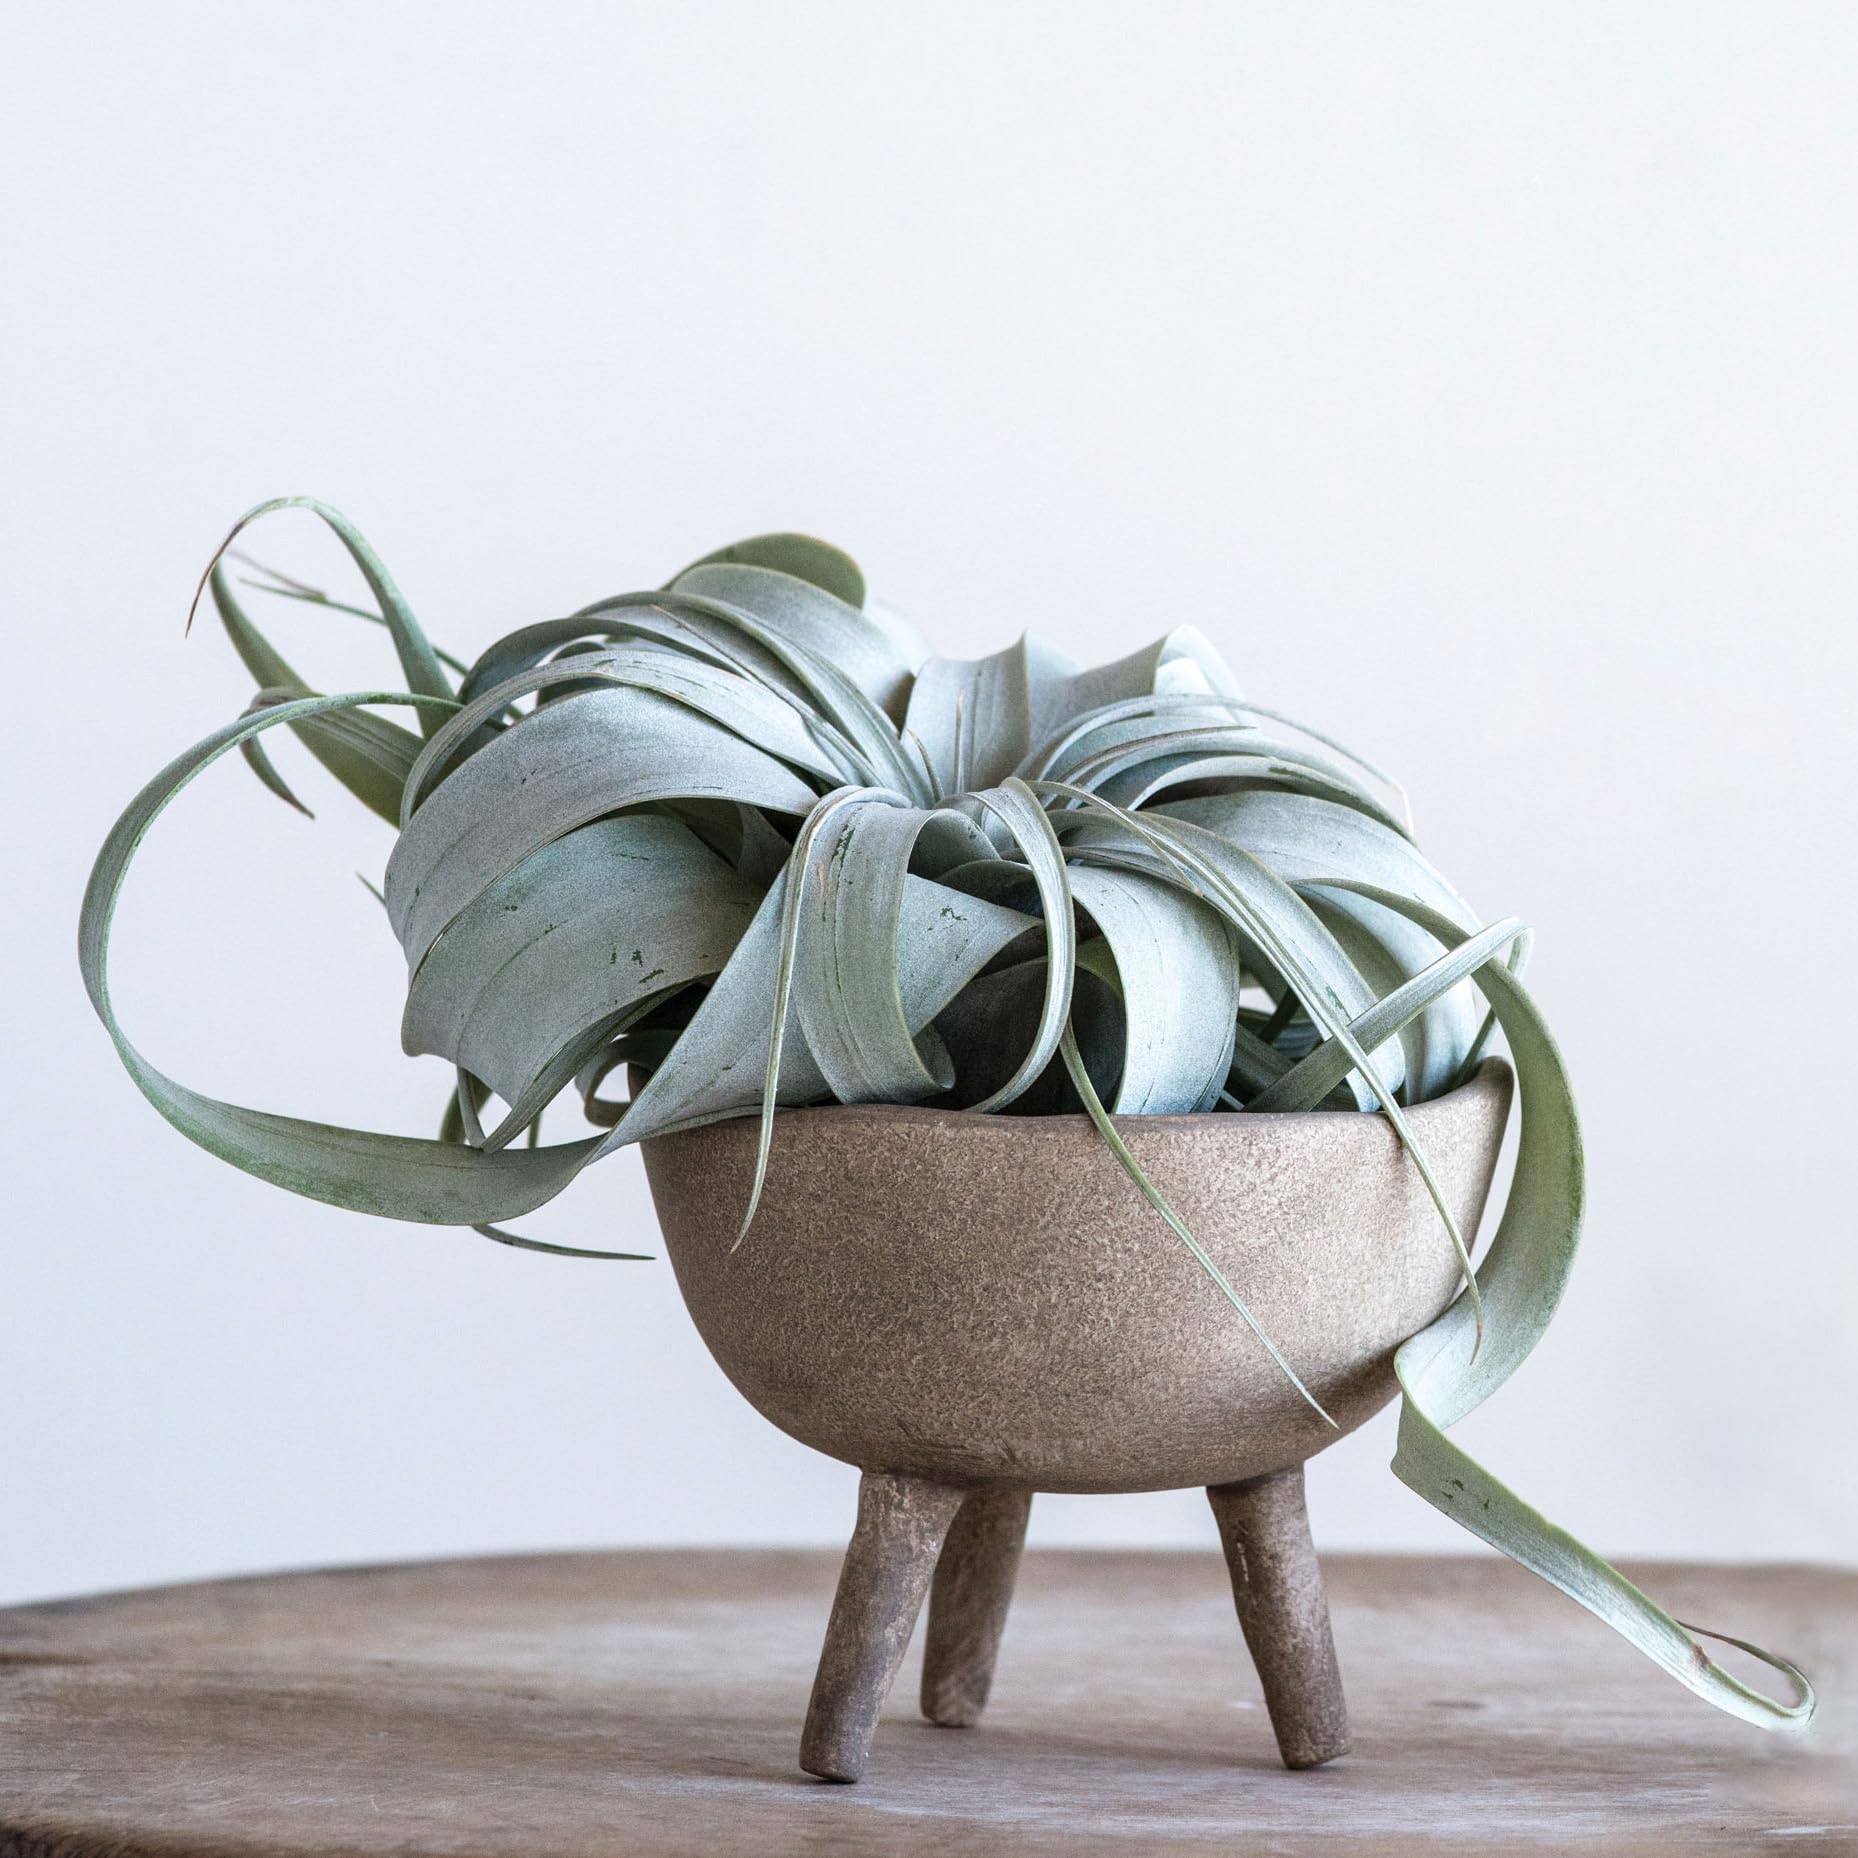 Creative Co-Op Boho Terracotta Footed Planter with Organic Edge, Matte Taupe